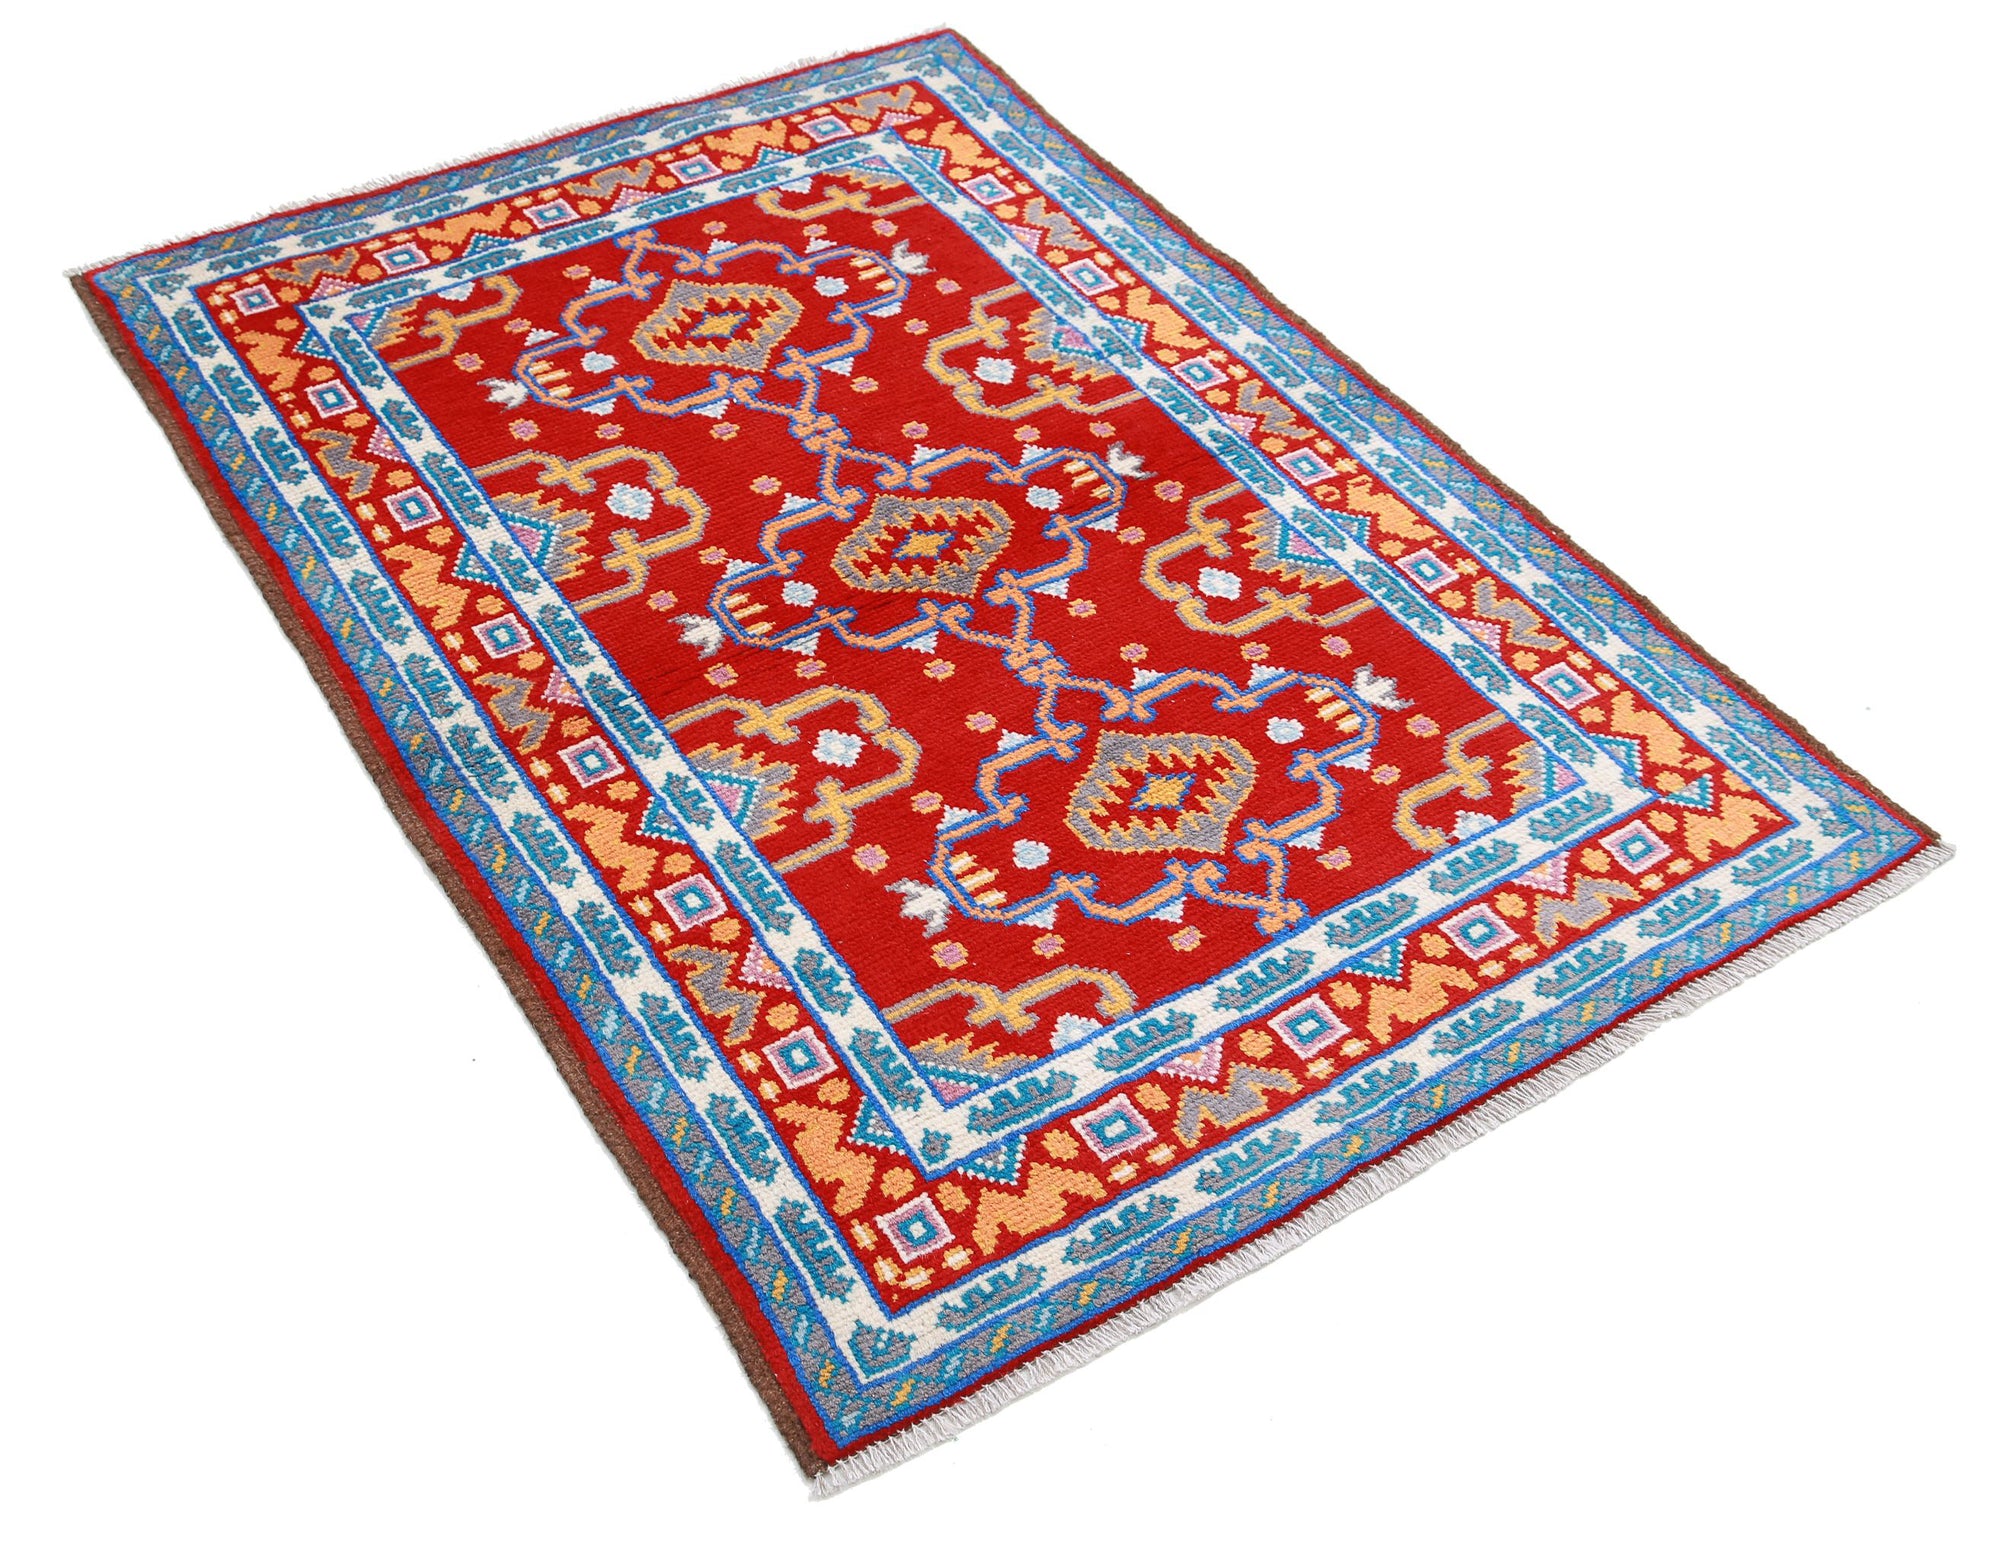 Revival-hand-knotted-qarghani-wool-rug-5014209-1.jpg